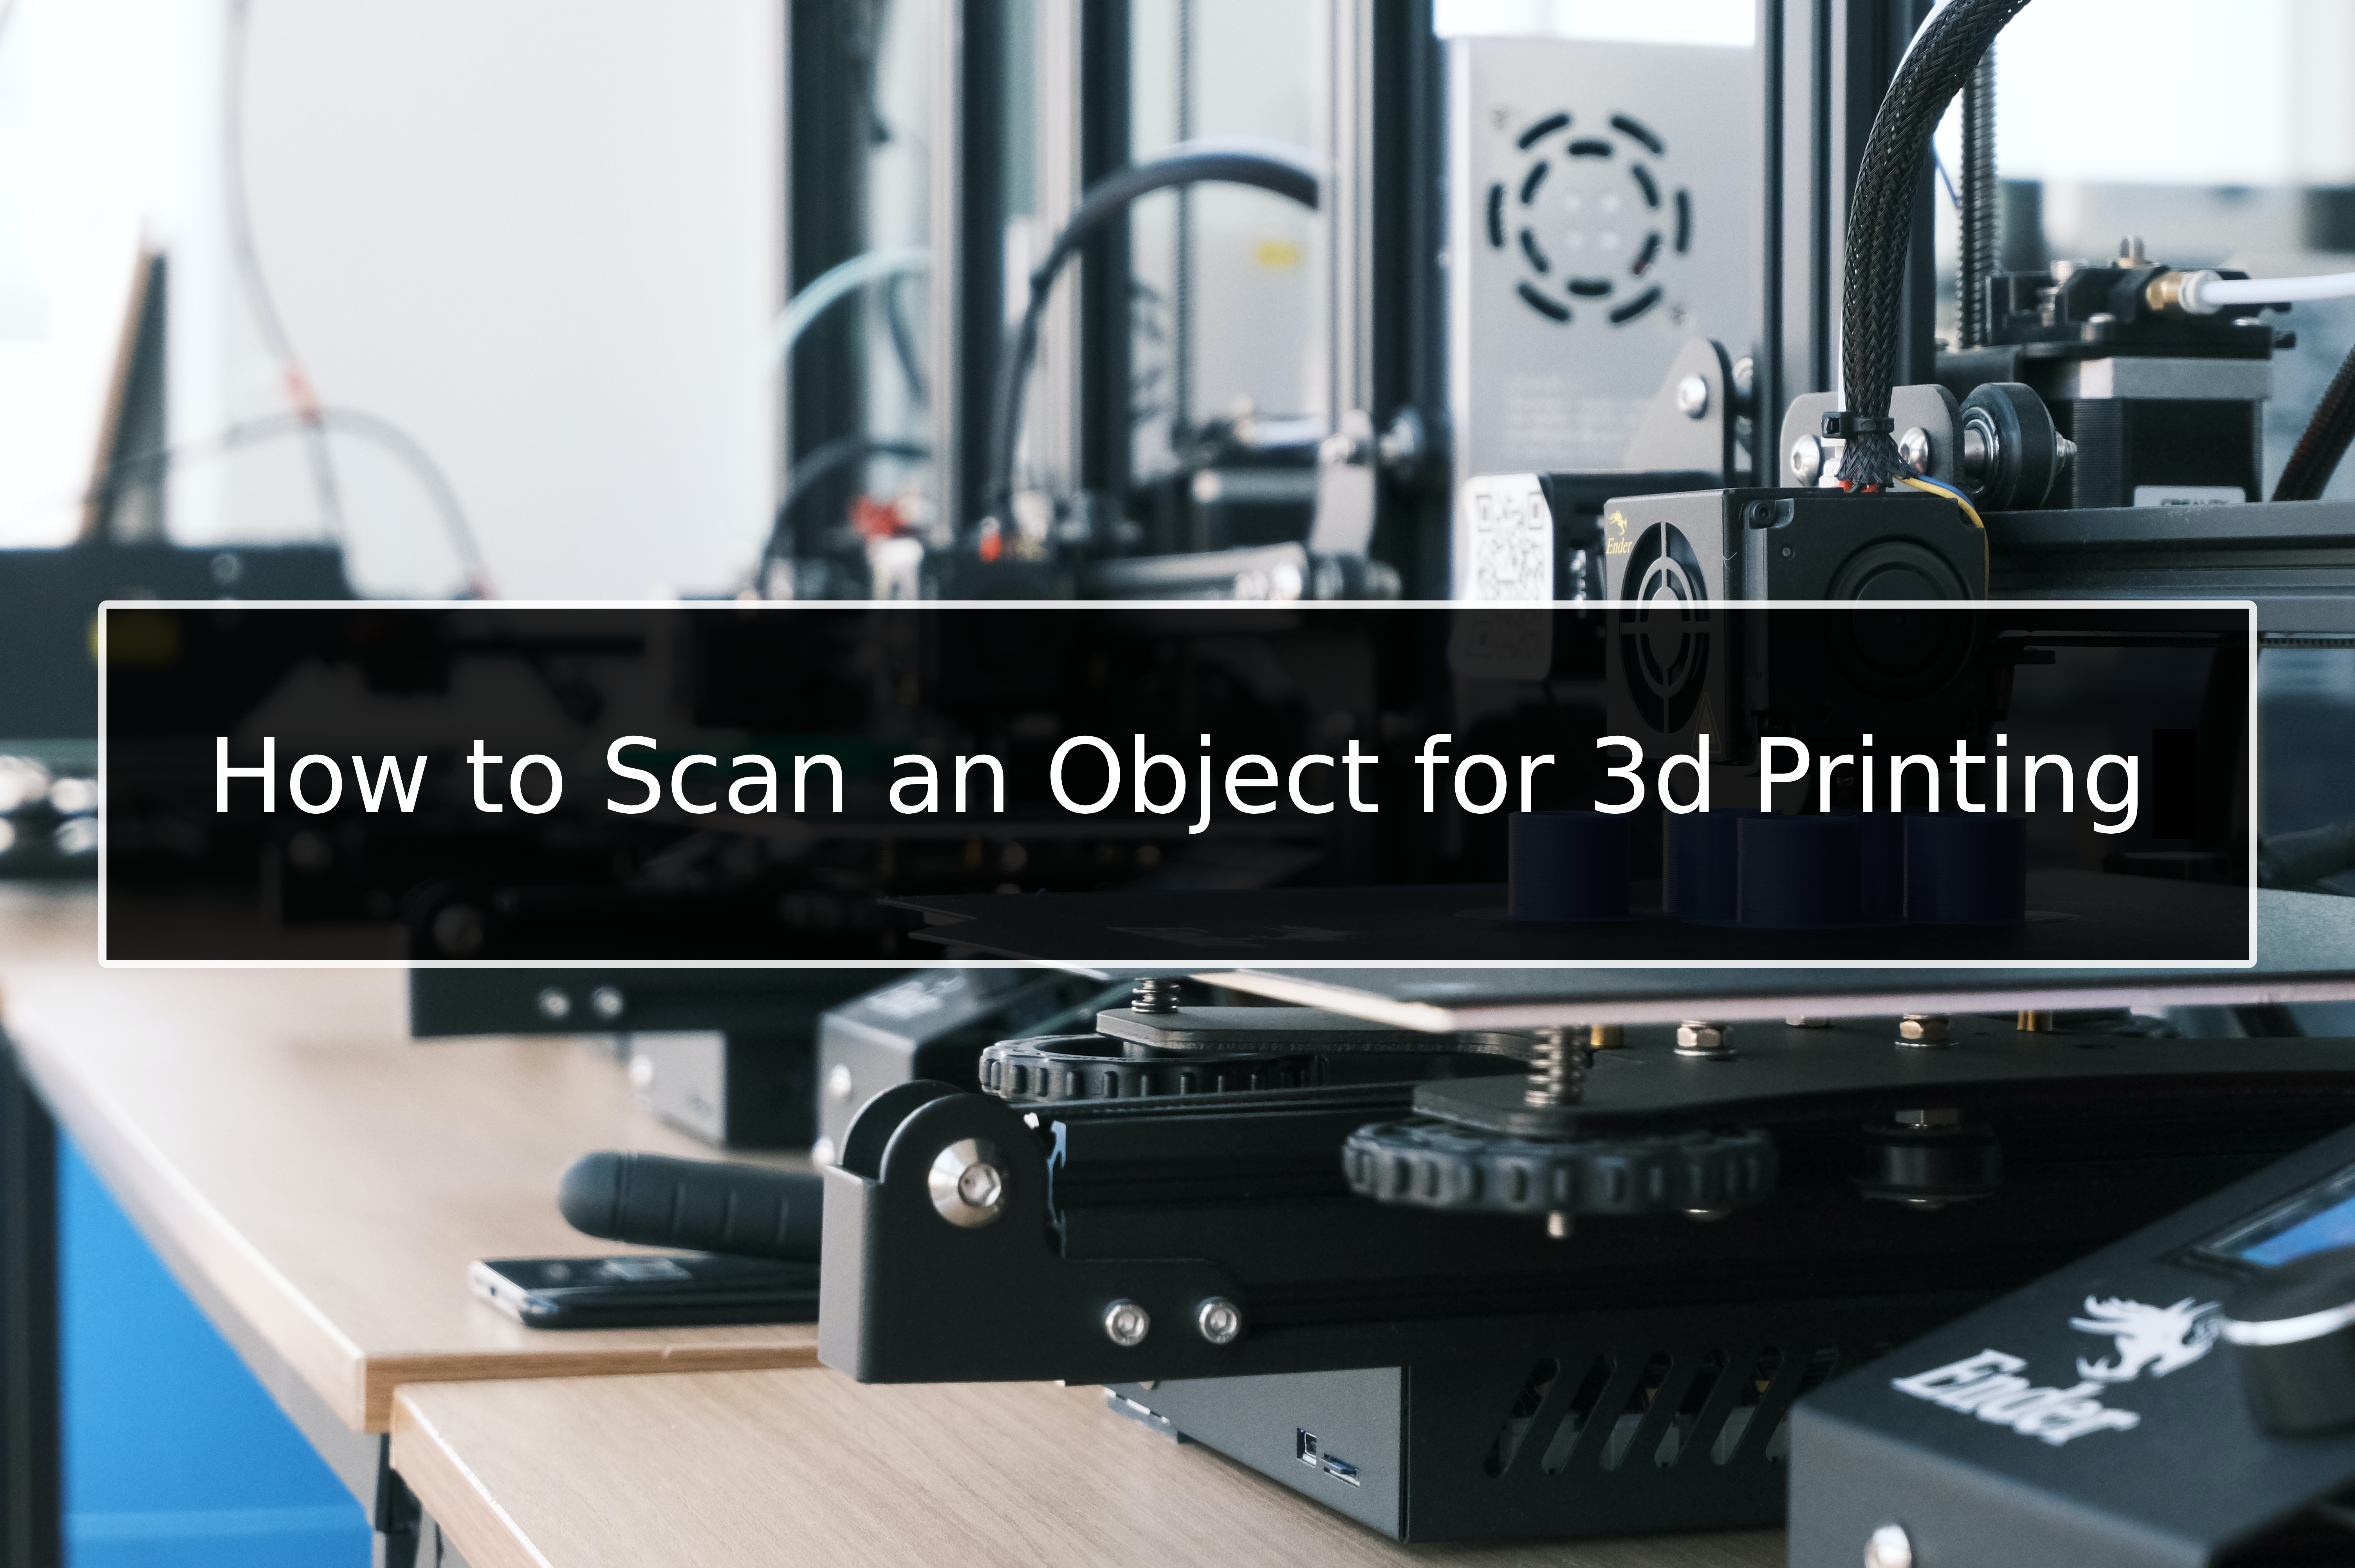 How to Scan an Object for 3d Printing